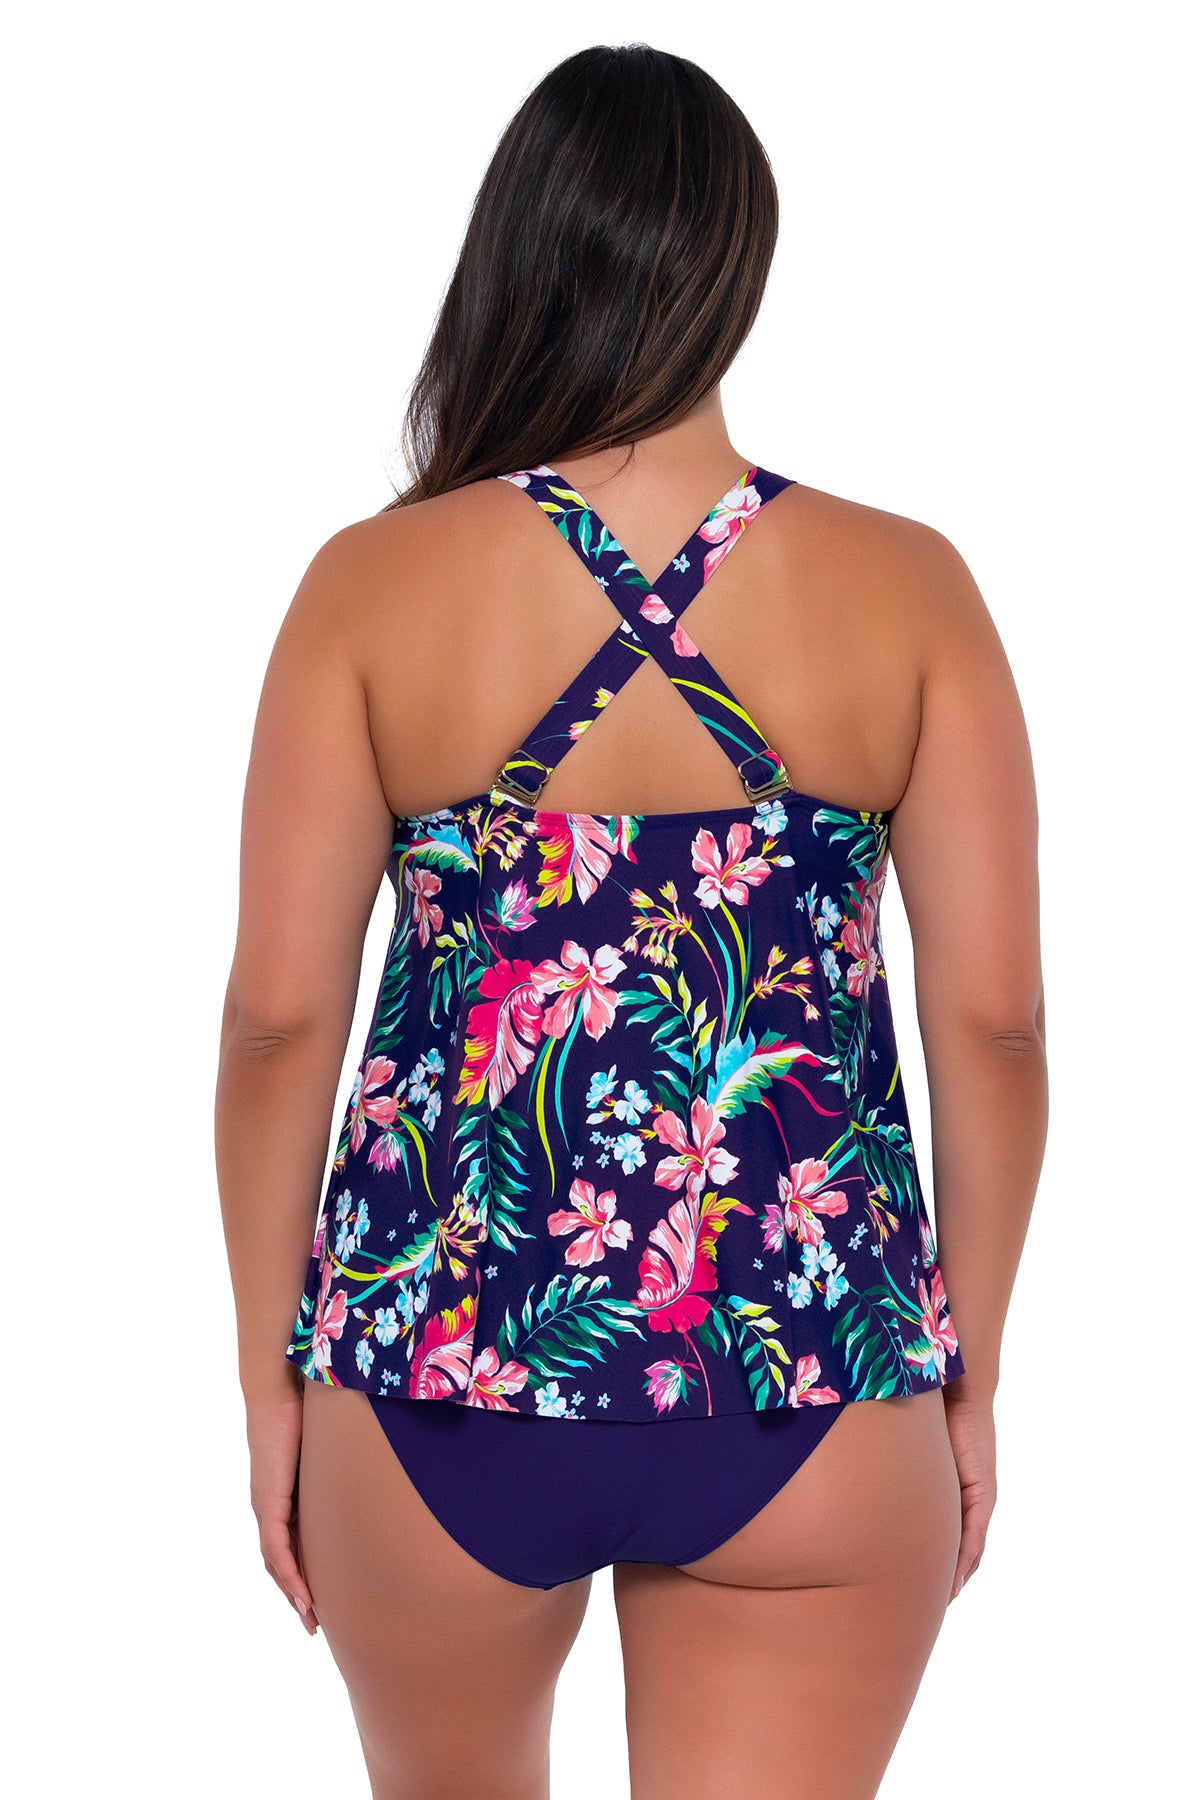 Back pose #1 of Nicky wearing Sunsets Escape Island Getaway Sadie Tankini Top showing crossback straps with matching Hannah High Waist bikini bottom